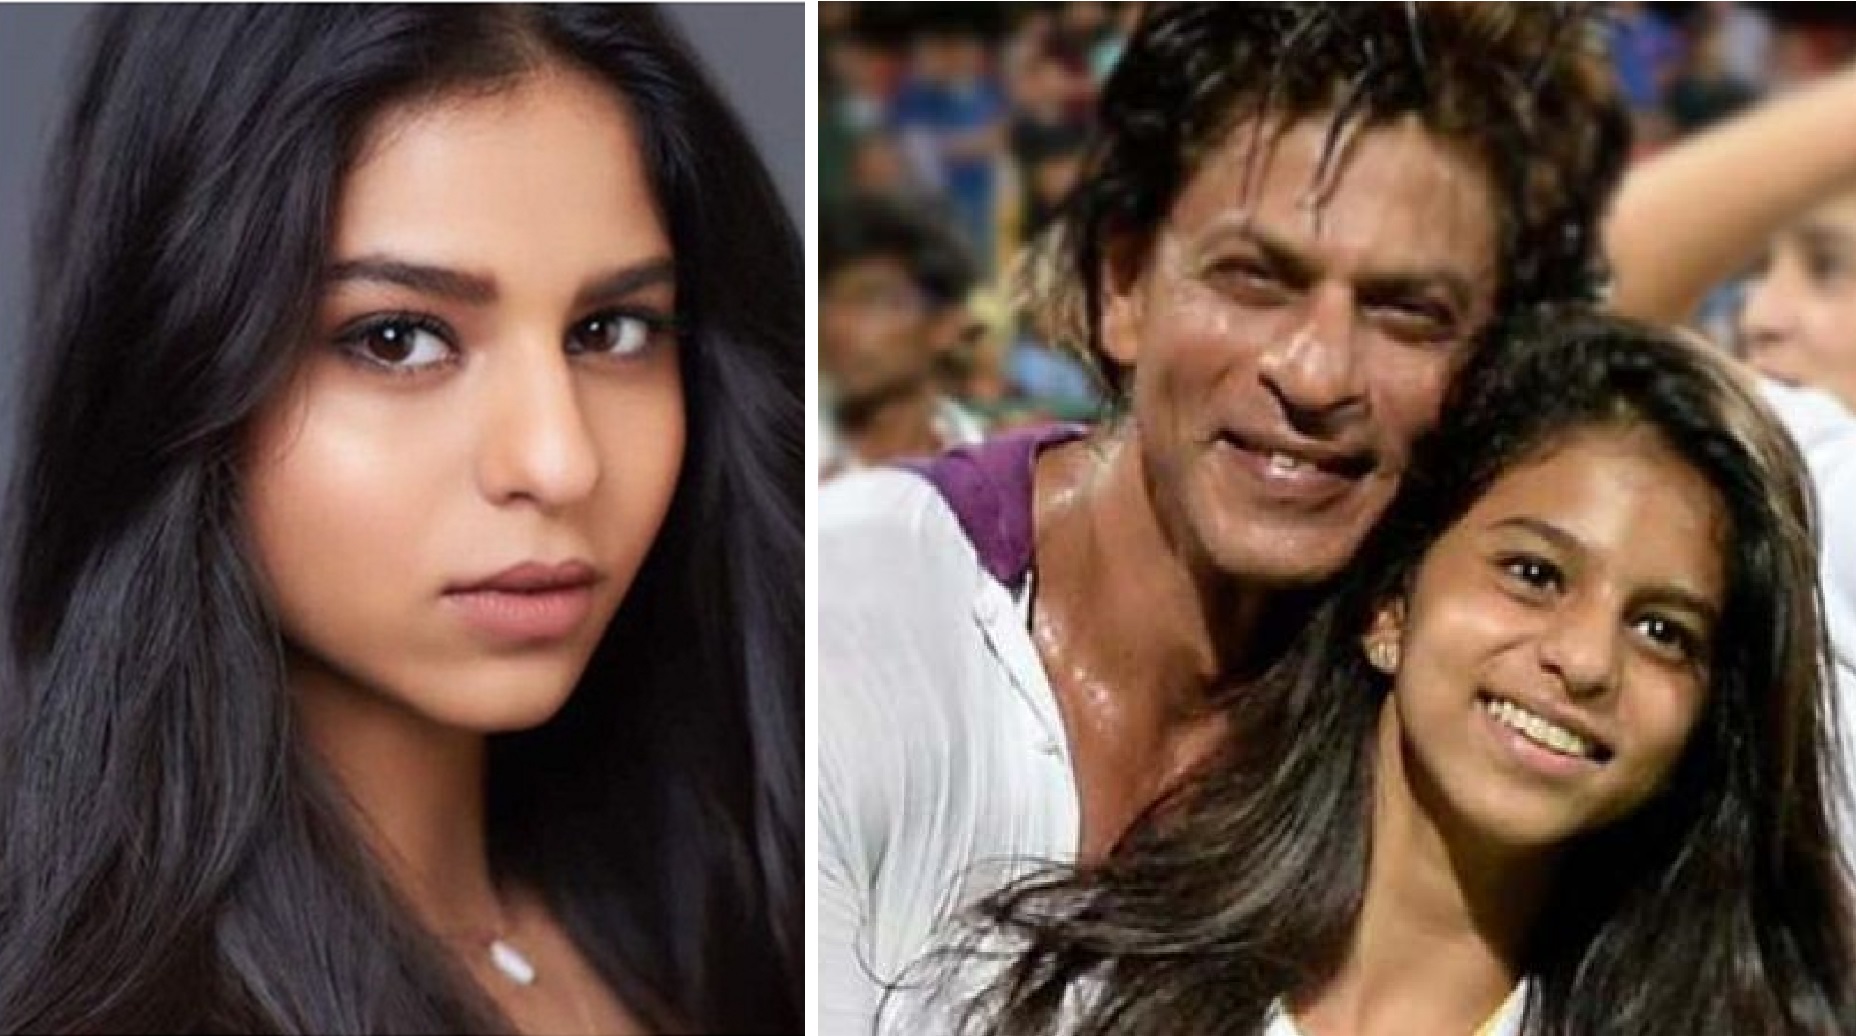 Shah Rukh Khan – “My daughter is sanwli, but she’s the most beautiful girl in the world”